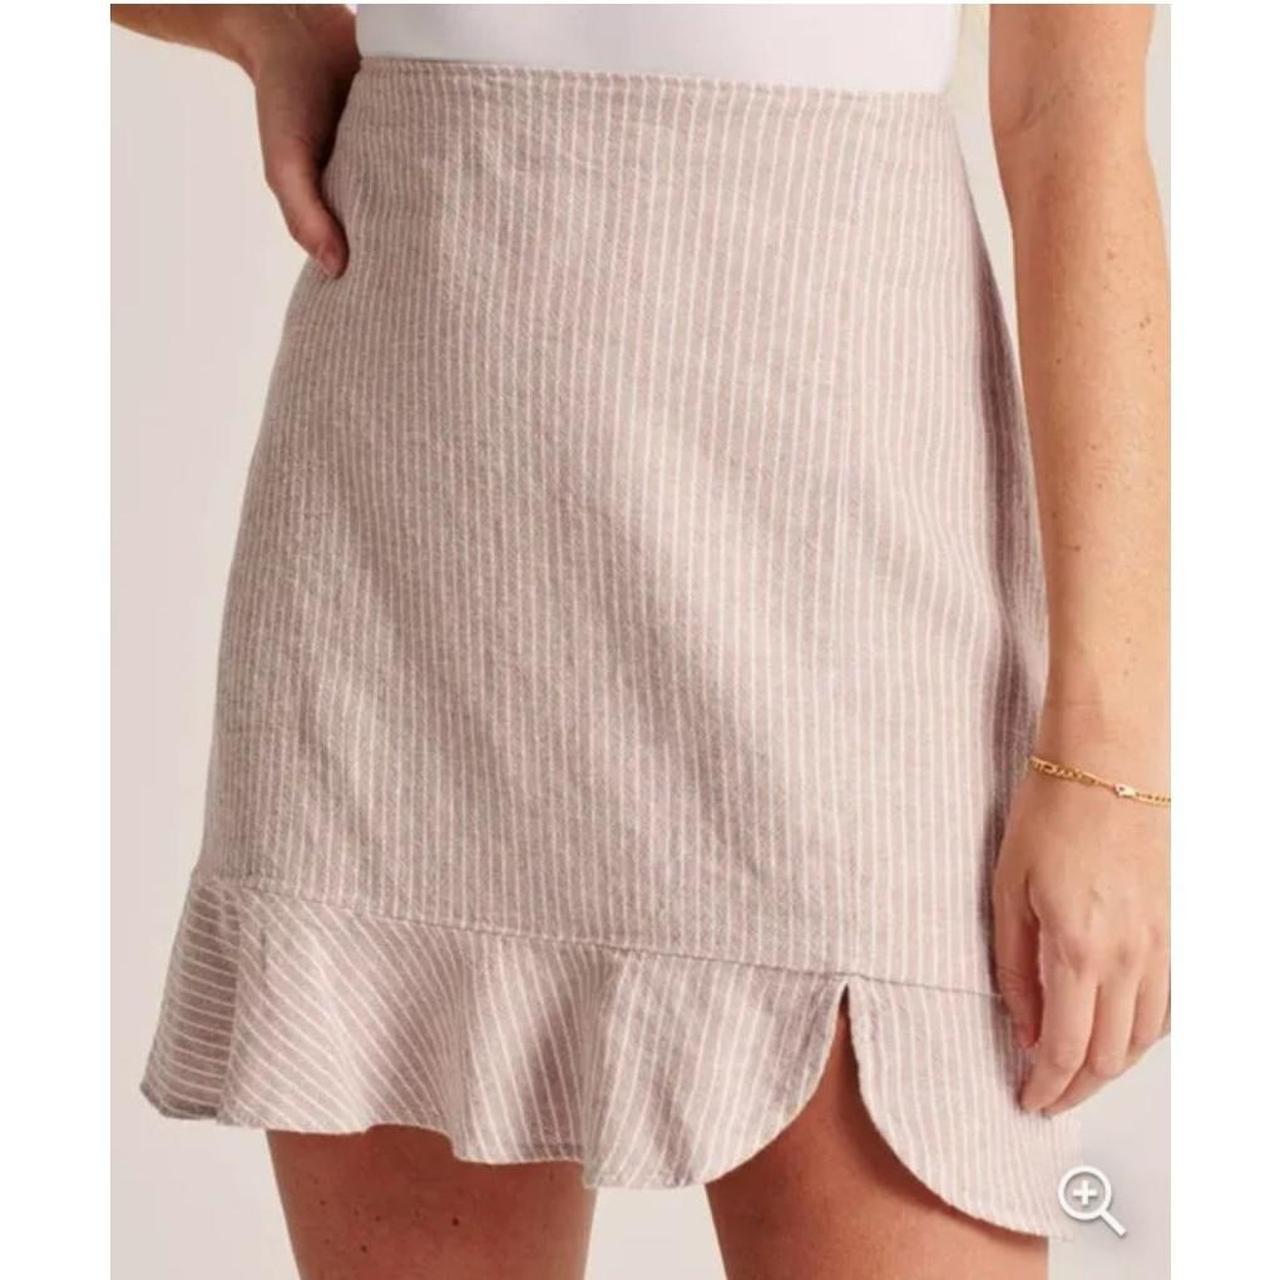 Abercrombie & Fitch Women's Tan and White Skirt